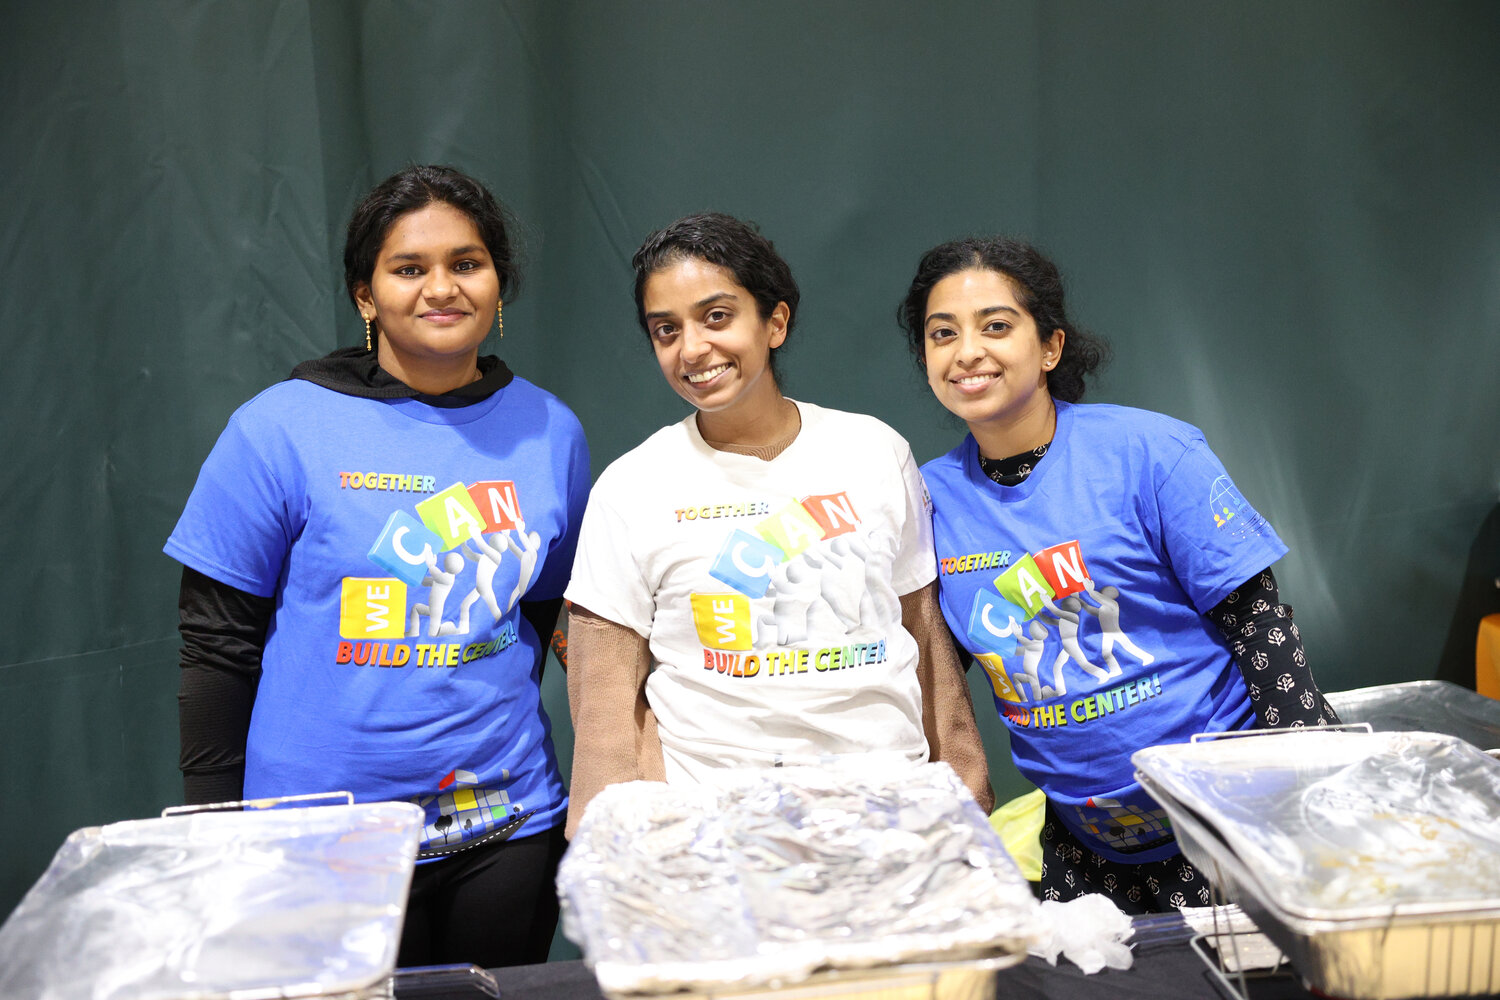 Aleena Joe, Zinnia Dodson and Dahlia Thomas all volunteered and lent a hand during the community dinner in Elmont.